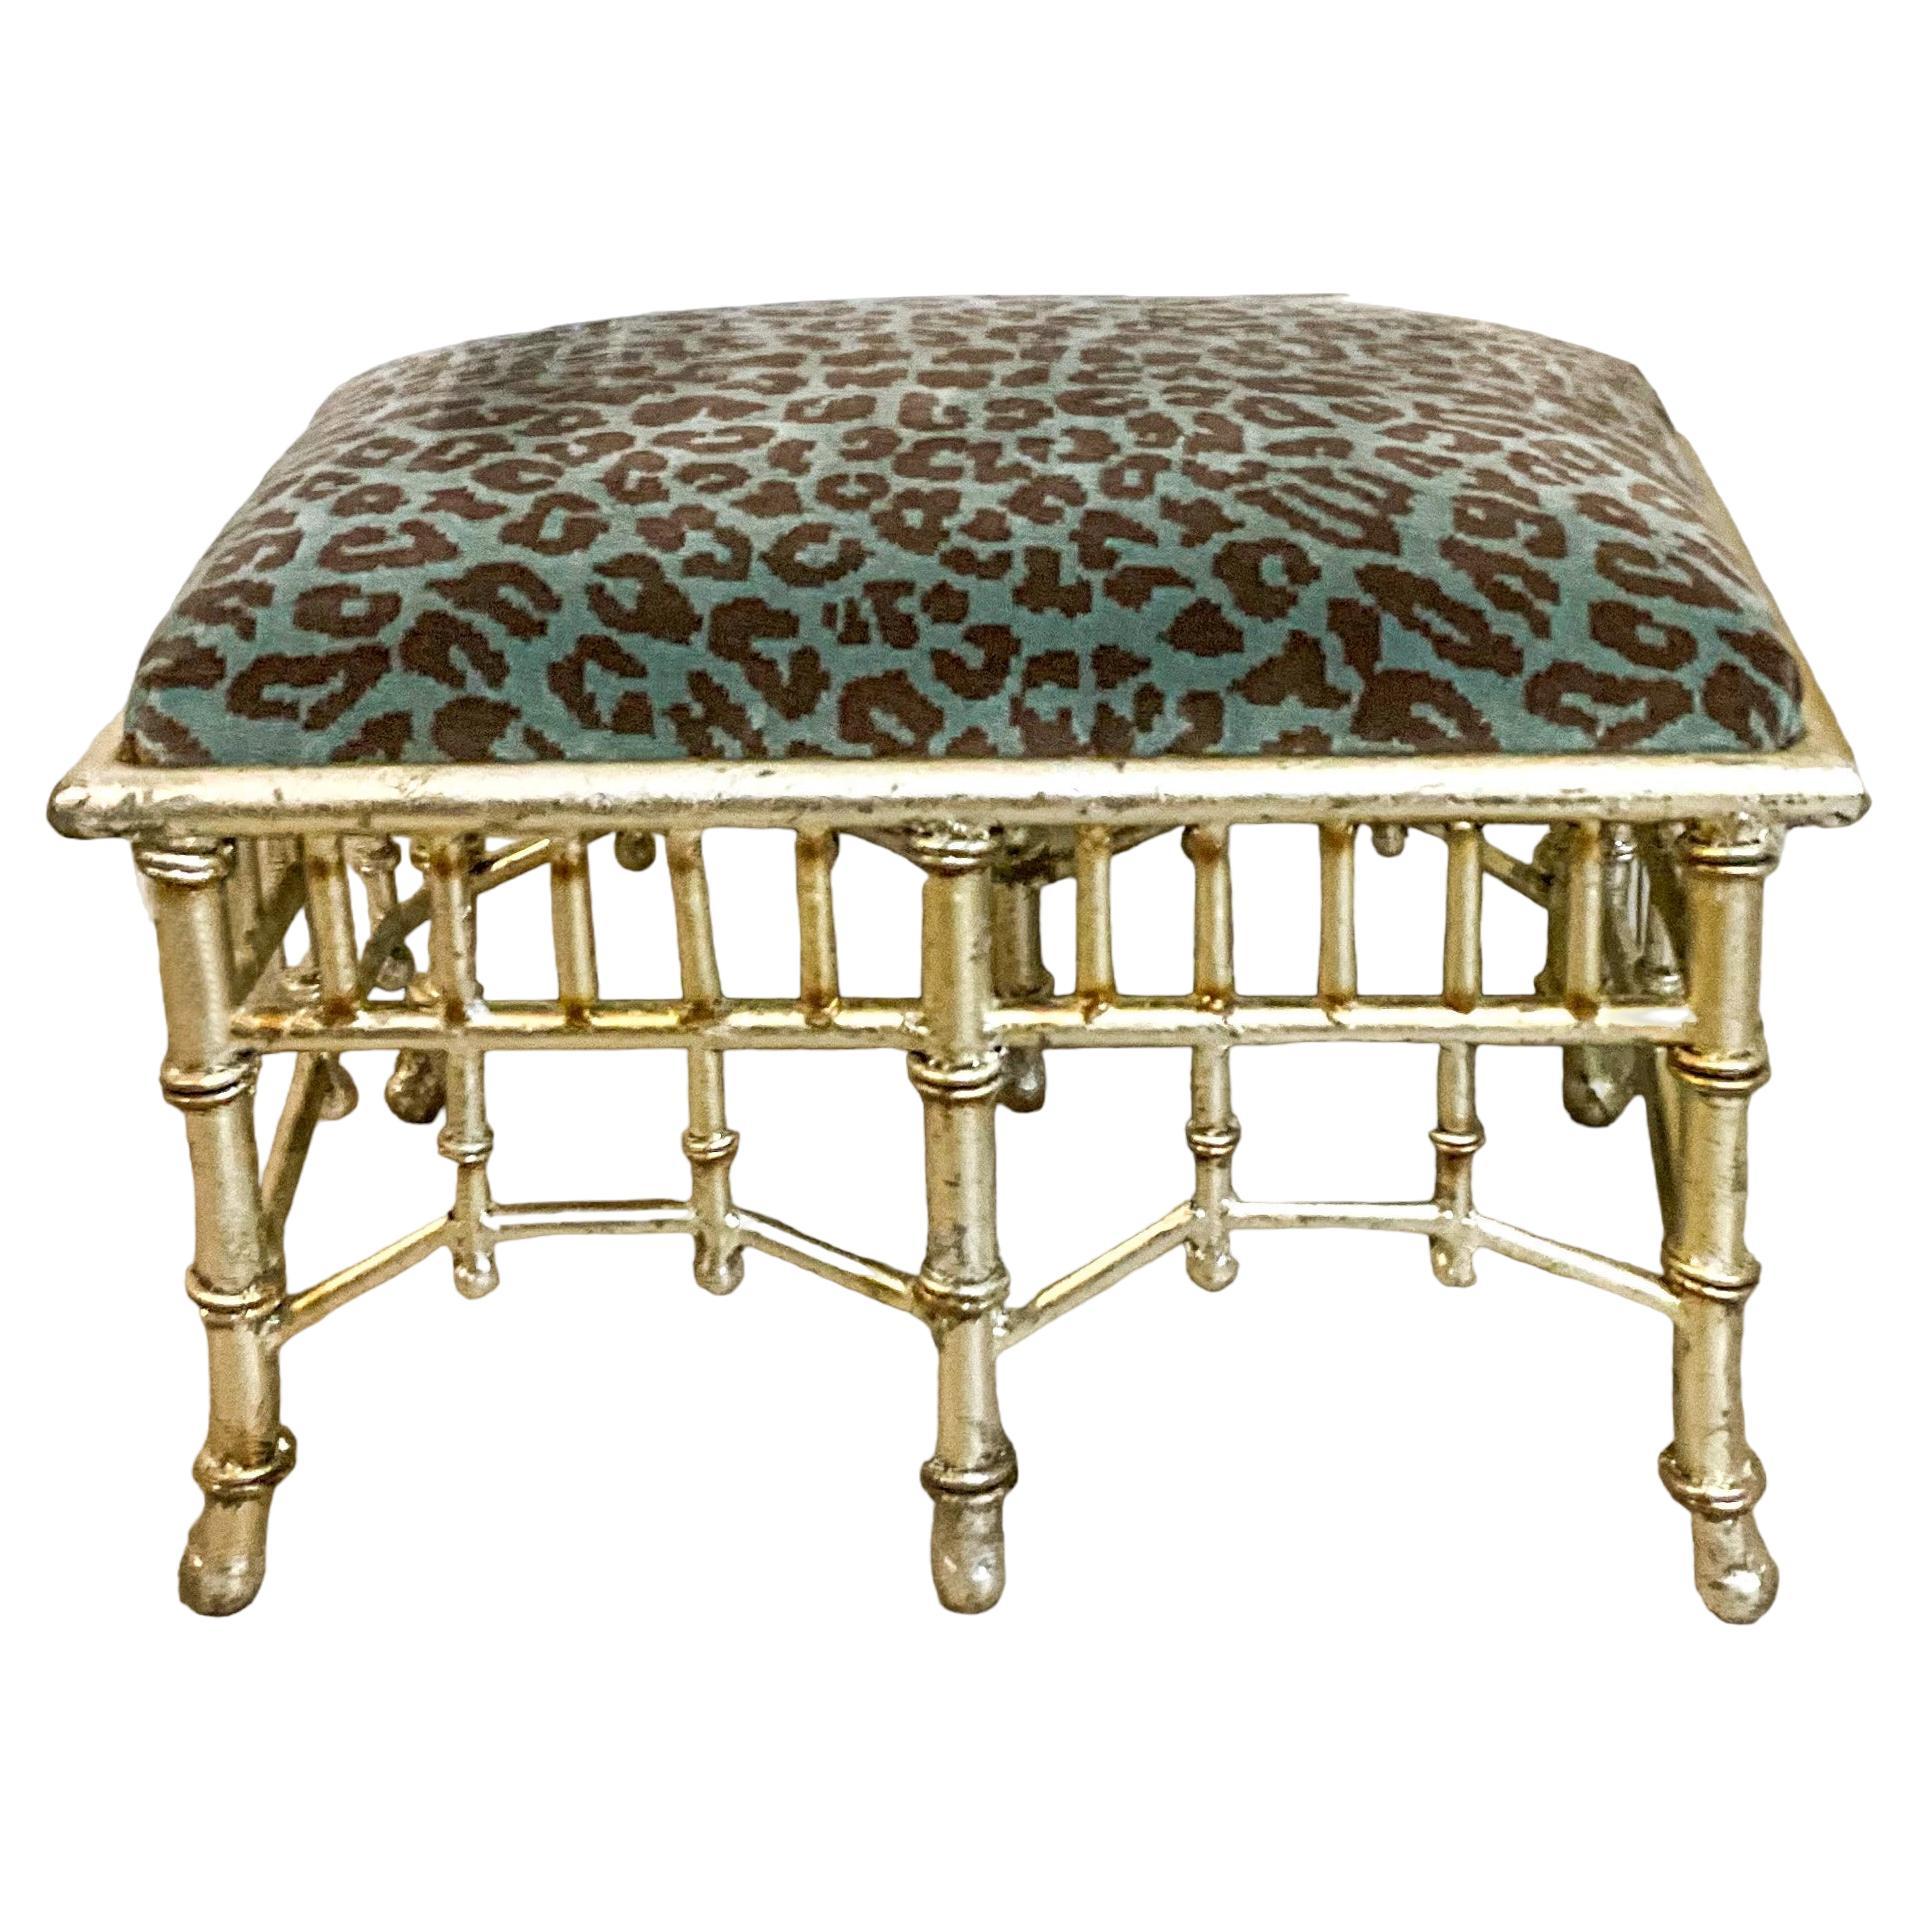 This is a 1950s Chinese Chippendale style silver gilt tole ottoman newly upholstered in a turquoise velvet. It is unmarked. It is most likely Italian.